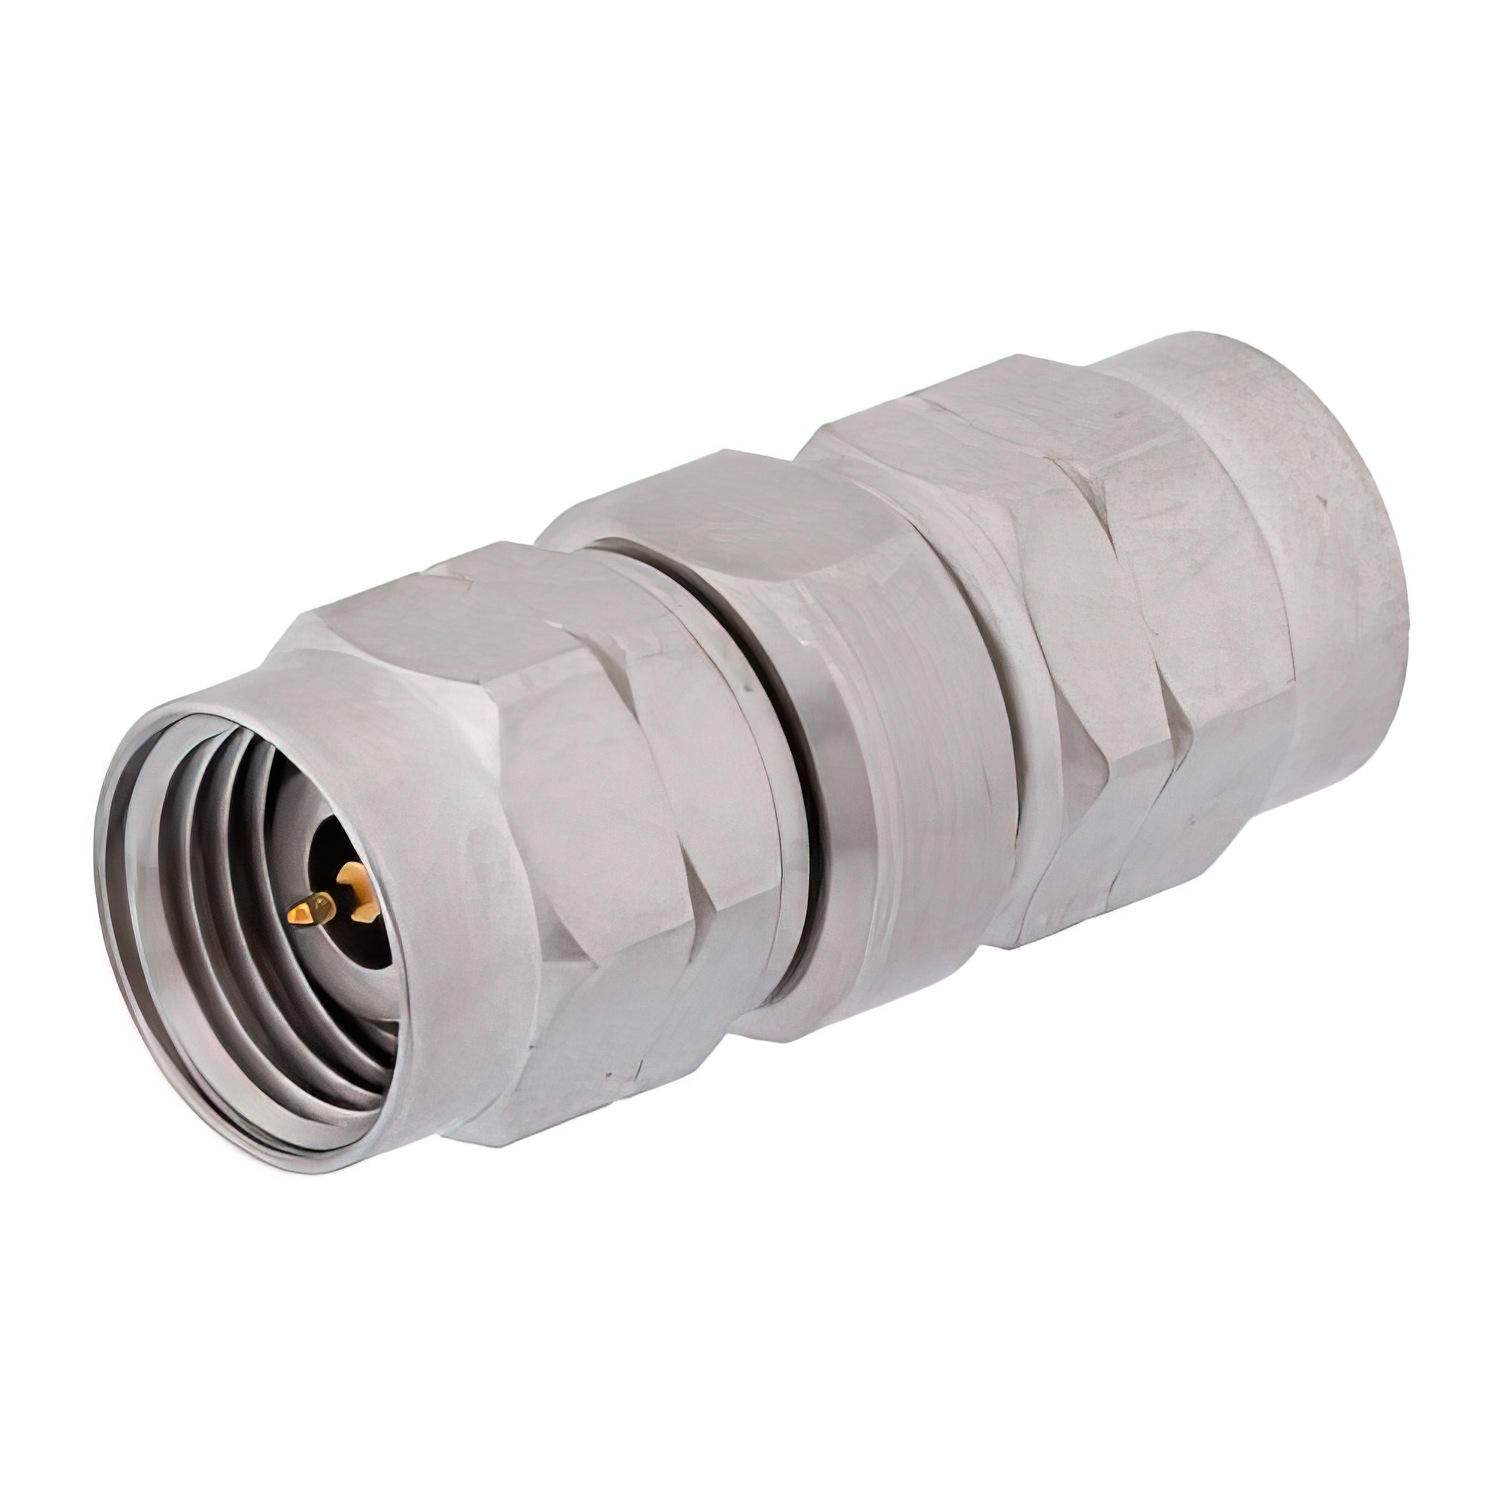 2.4mm male to 2.4mm male adapter1